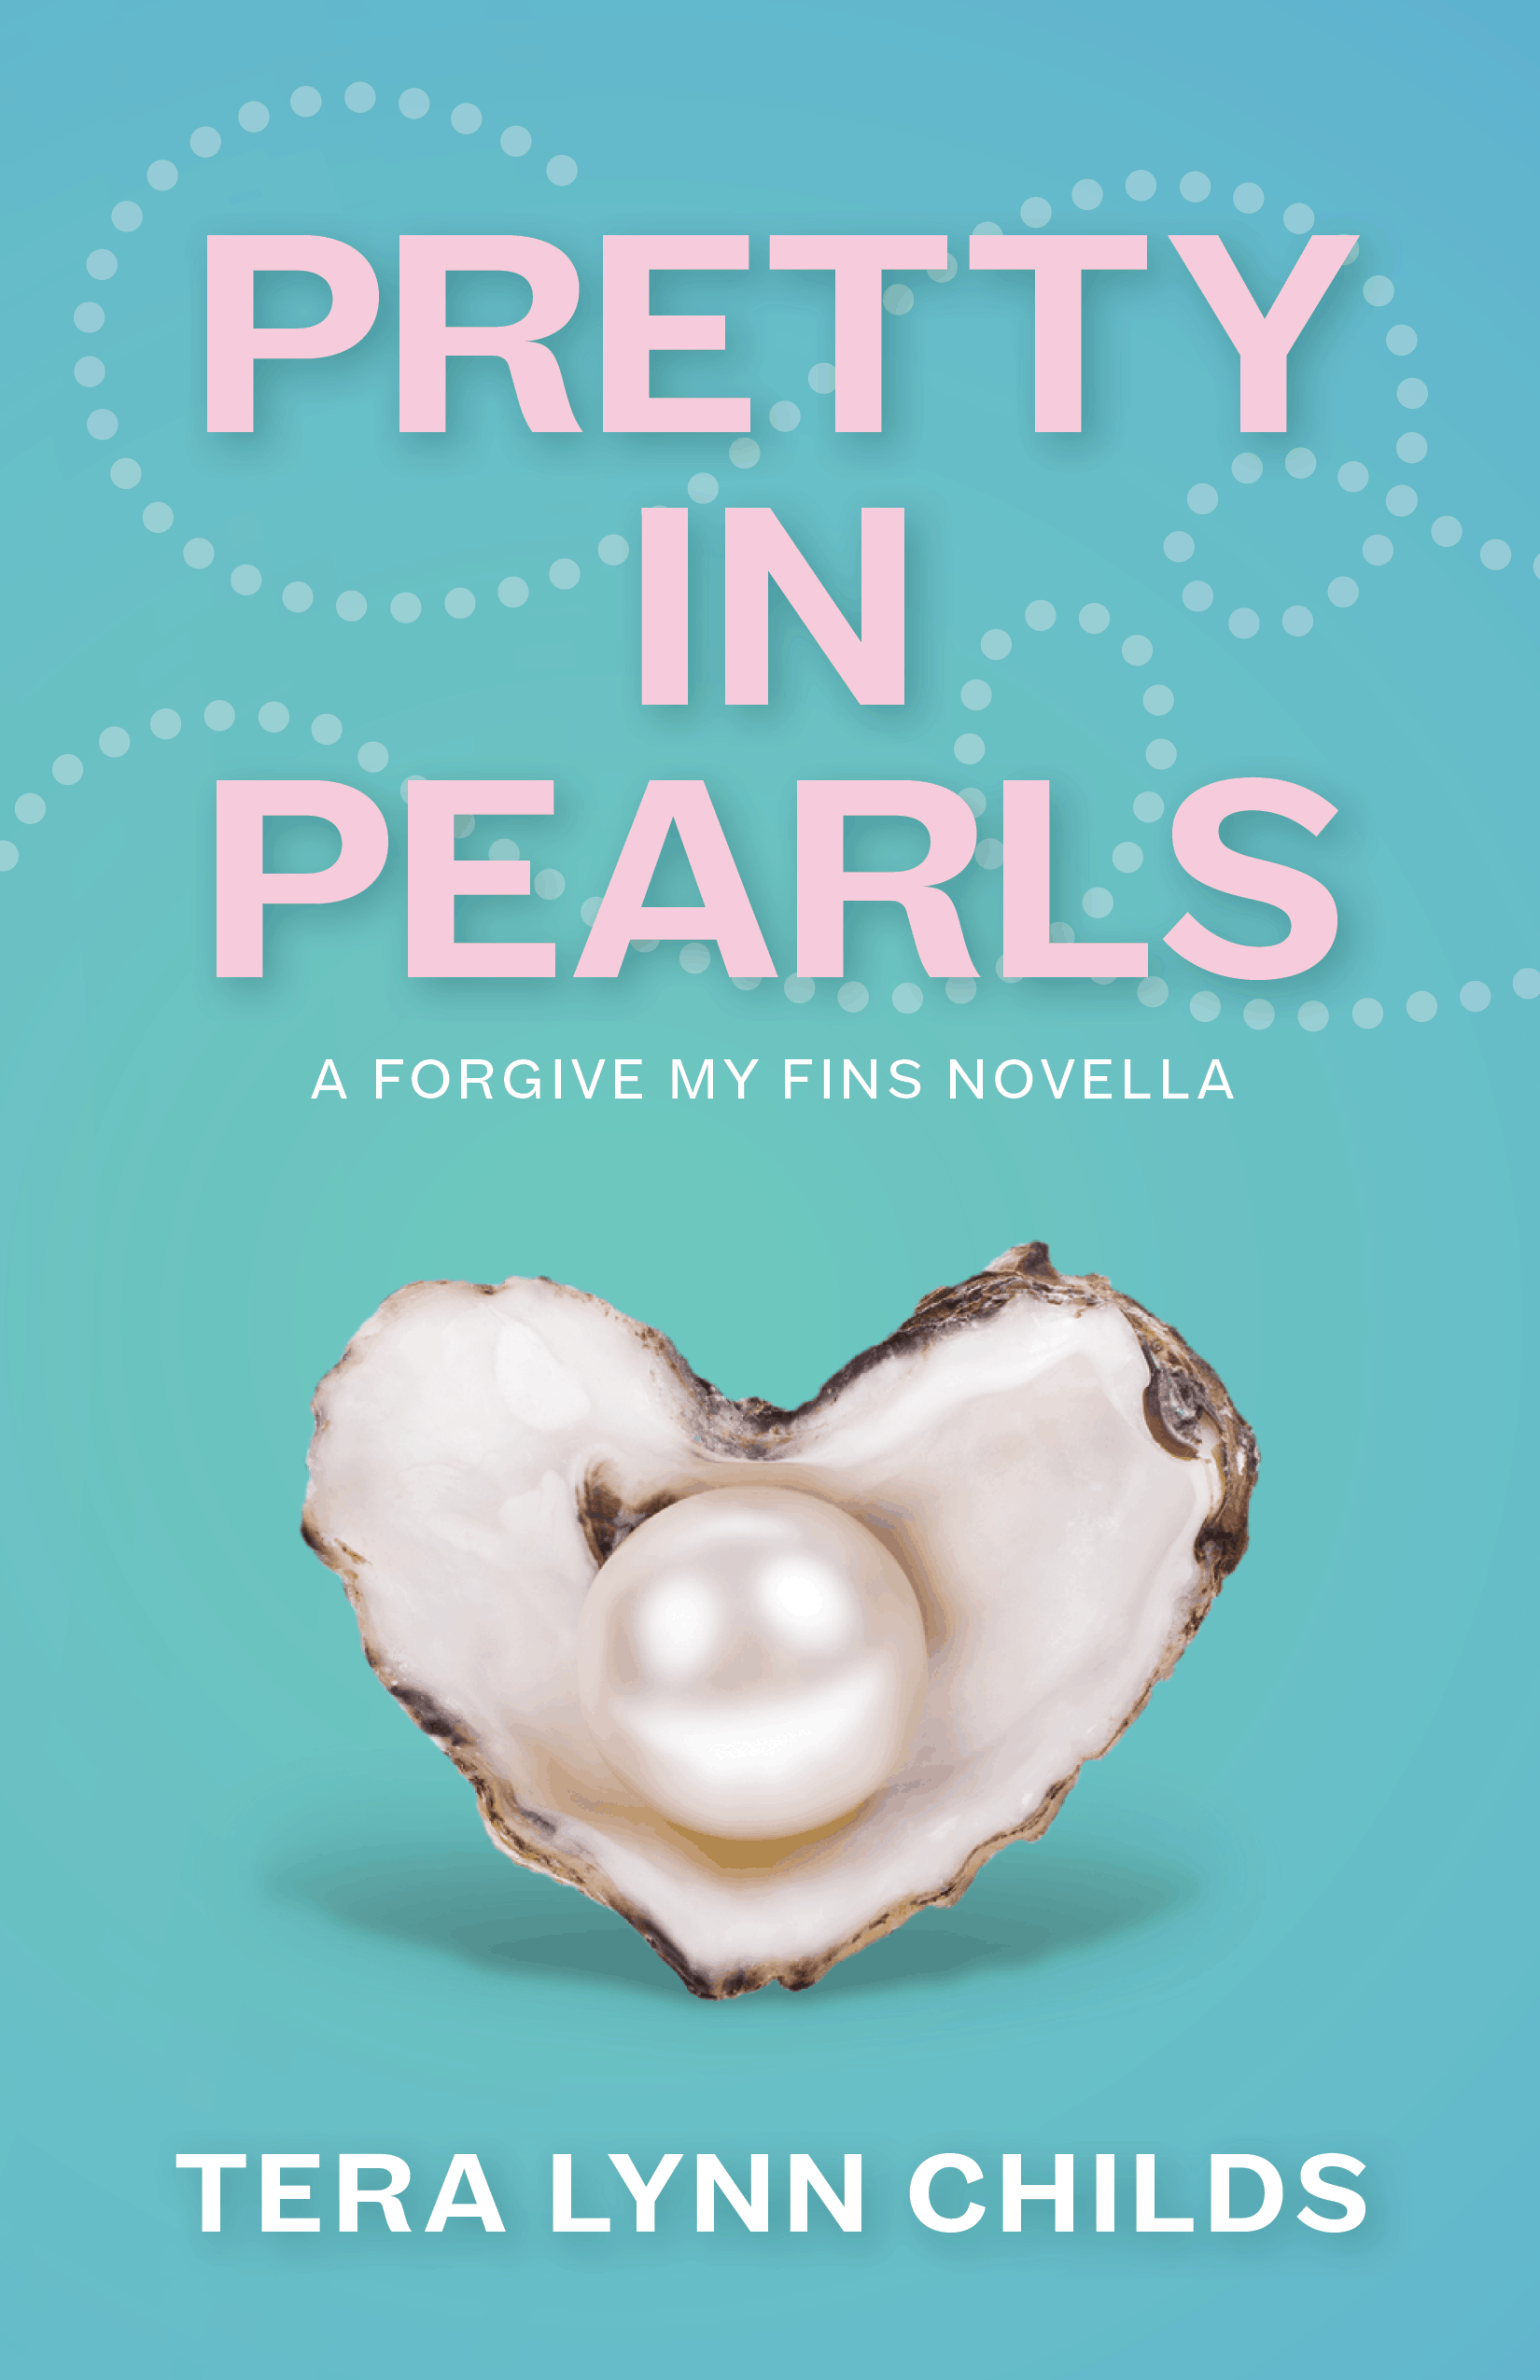 Cover of Pretty in Pearls, showing a heart-shaped shell holding a pearl.